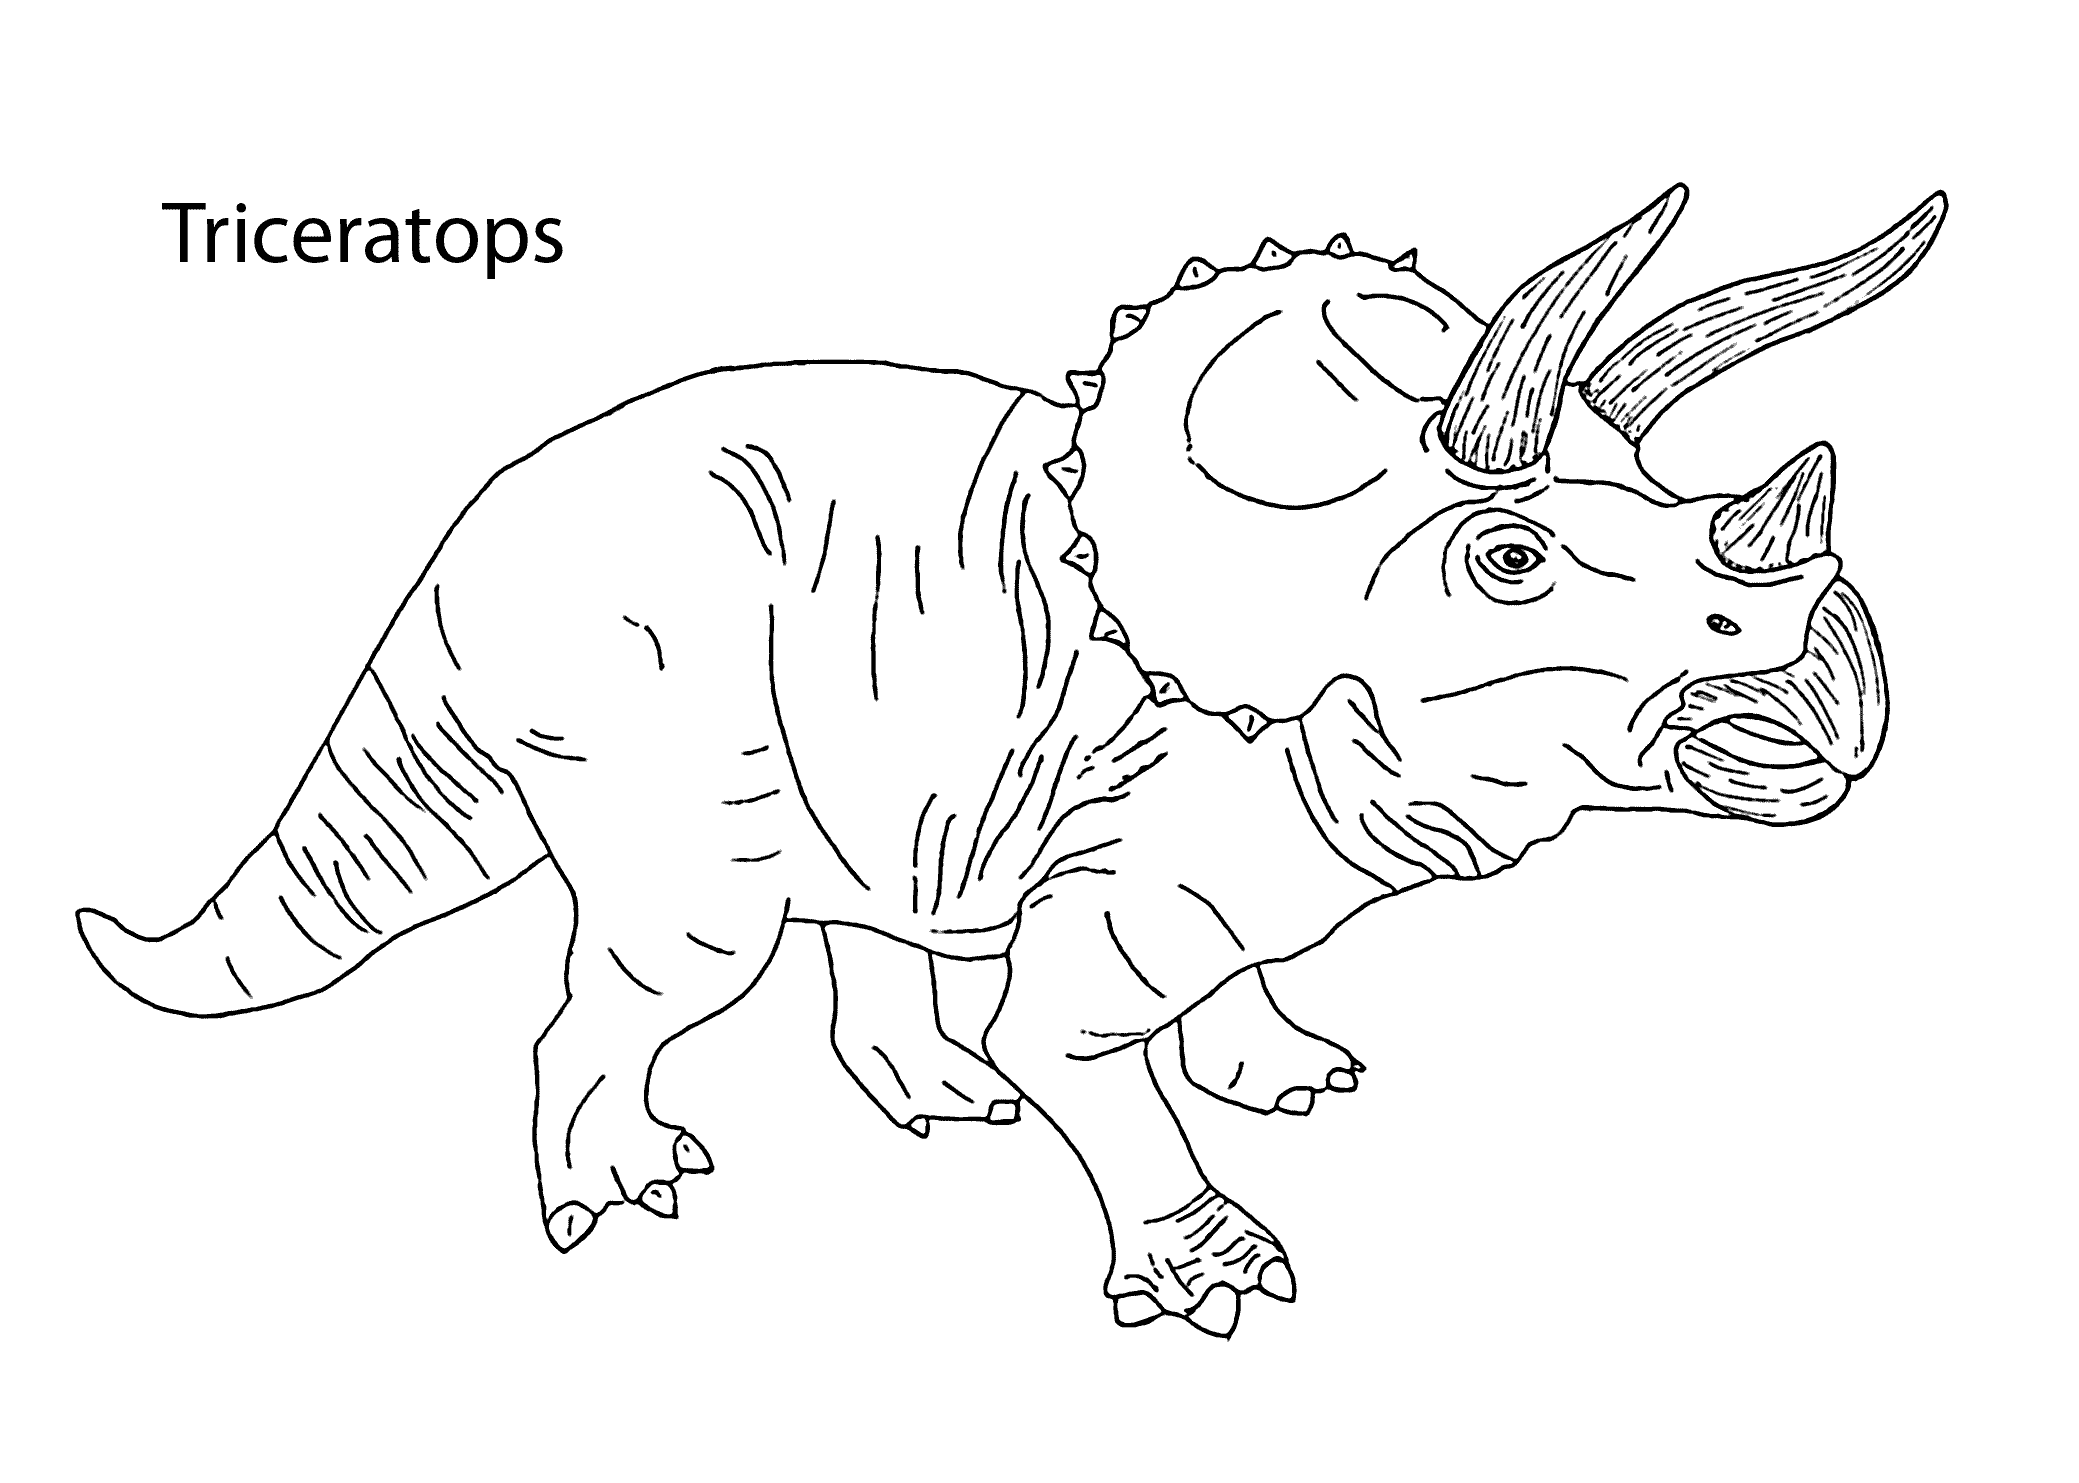 triceratops coloring pages free printable triceratops coloring pages for kids triceratops coloring pages 1 1